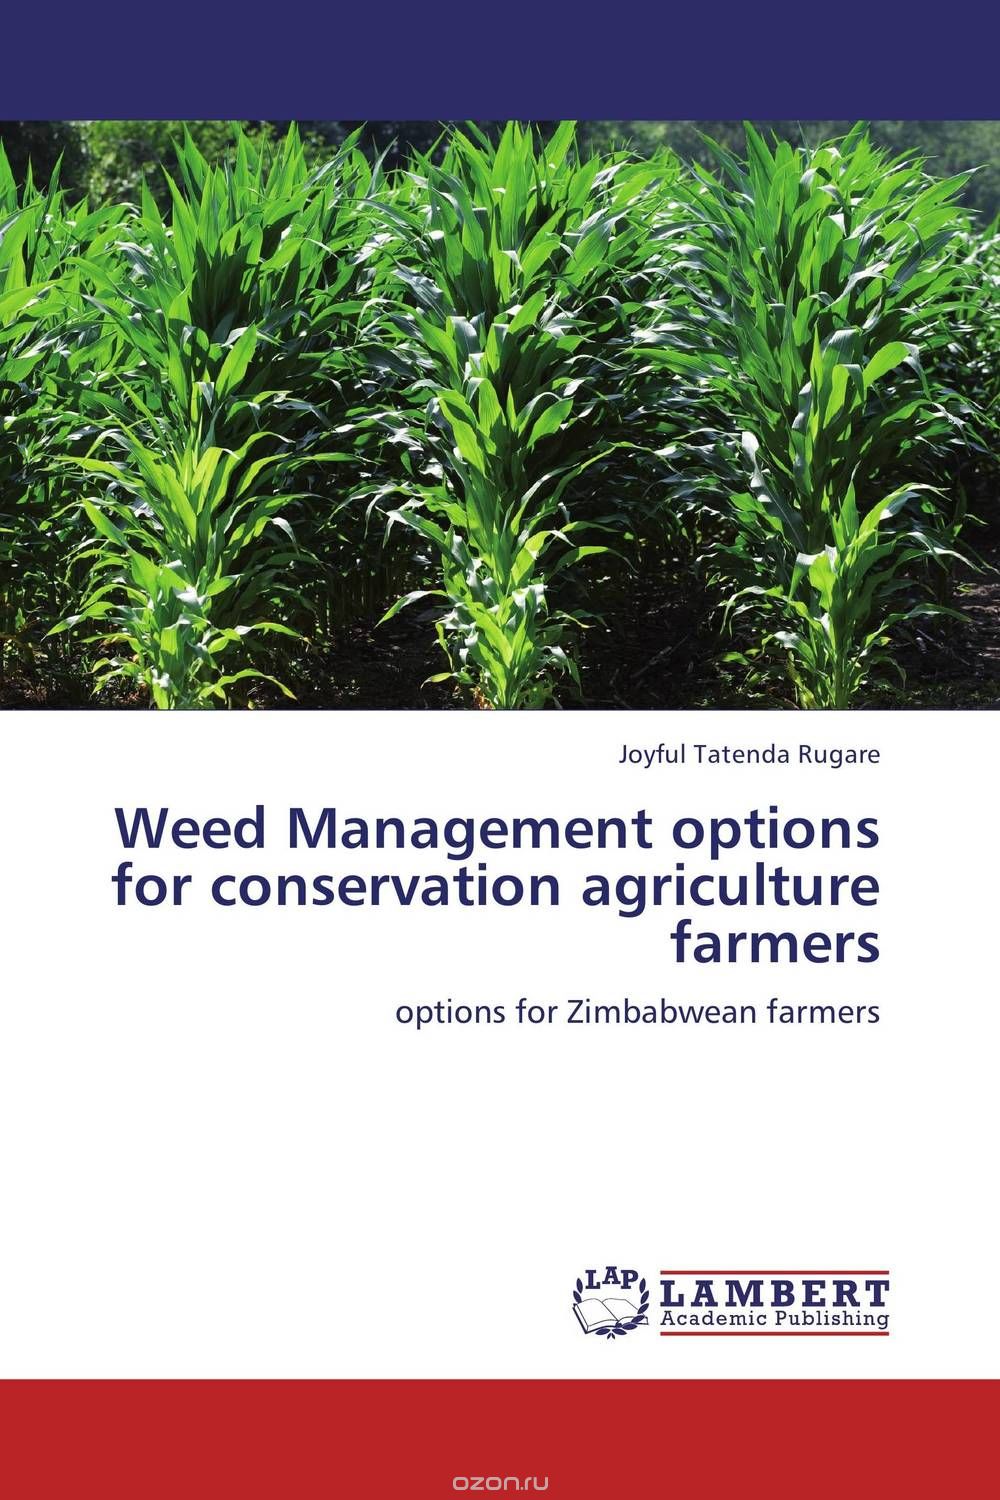 Weed Management options for conservation agriculture farmers